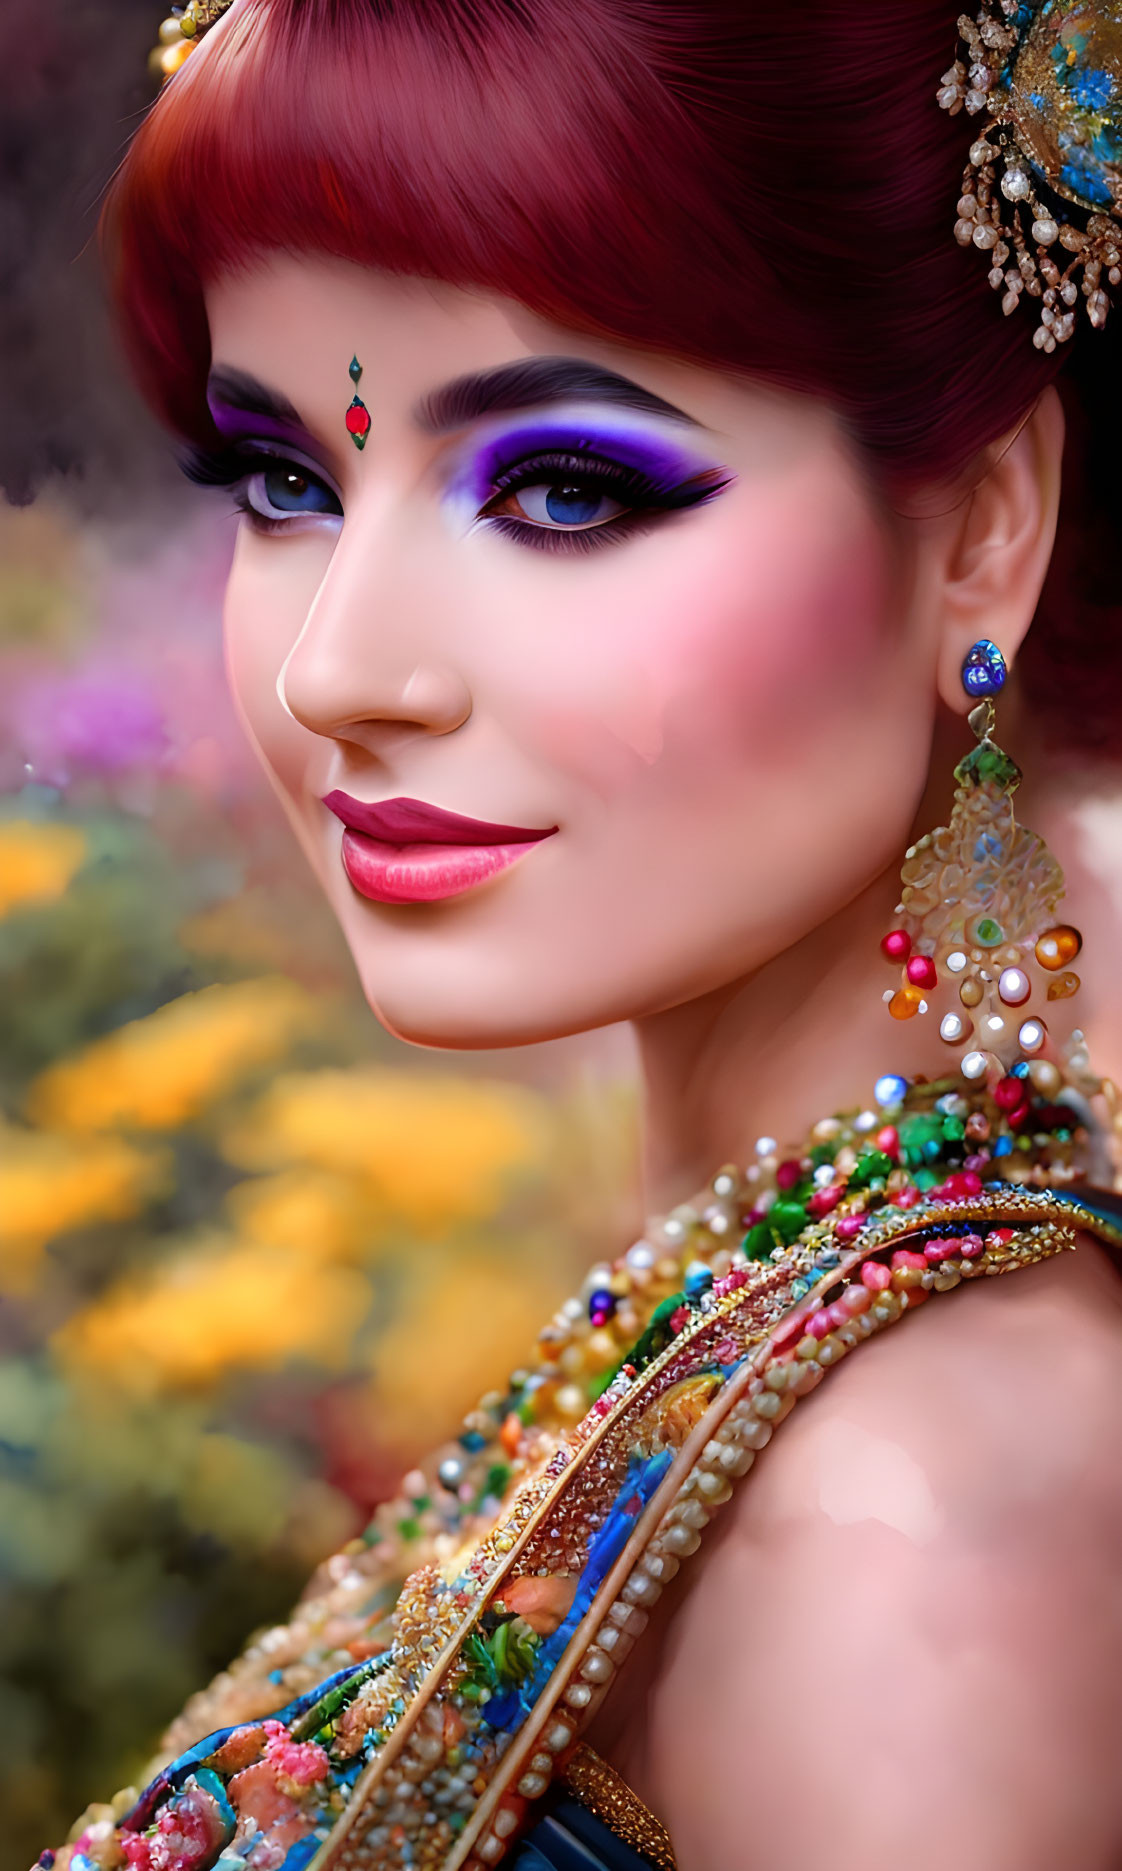 Woman with vibrant makeup and elaborate jewelry against blurred floral background